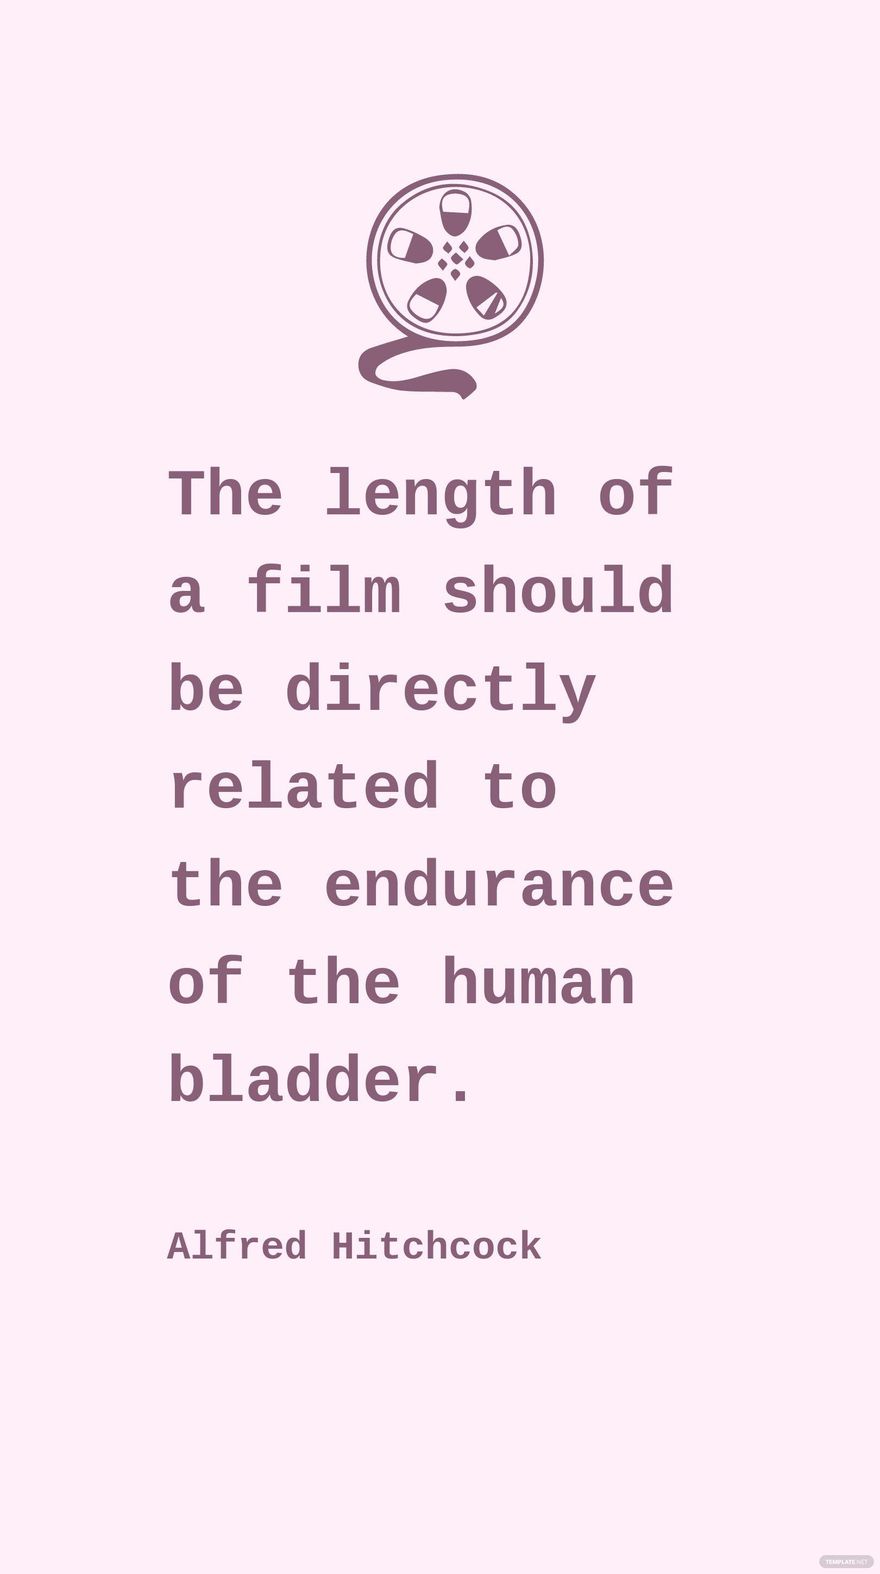 Alfred Hitchcock - The length of a film should be directly related to the endurance of the human bladder. in JPG